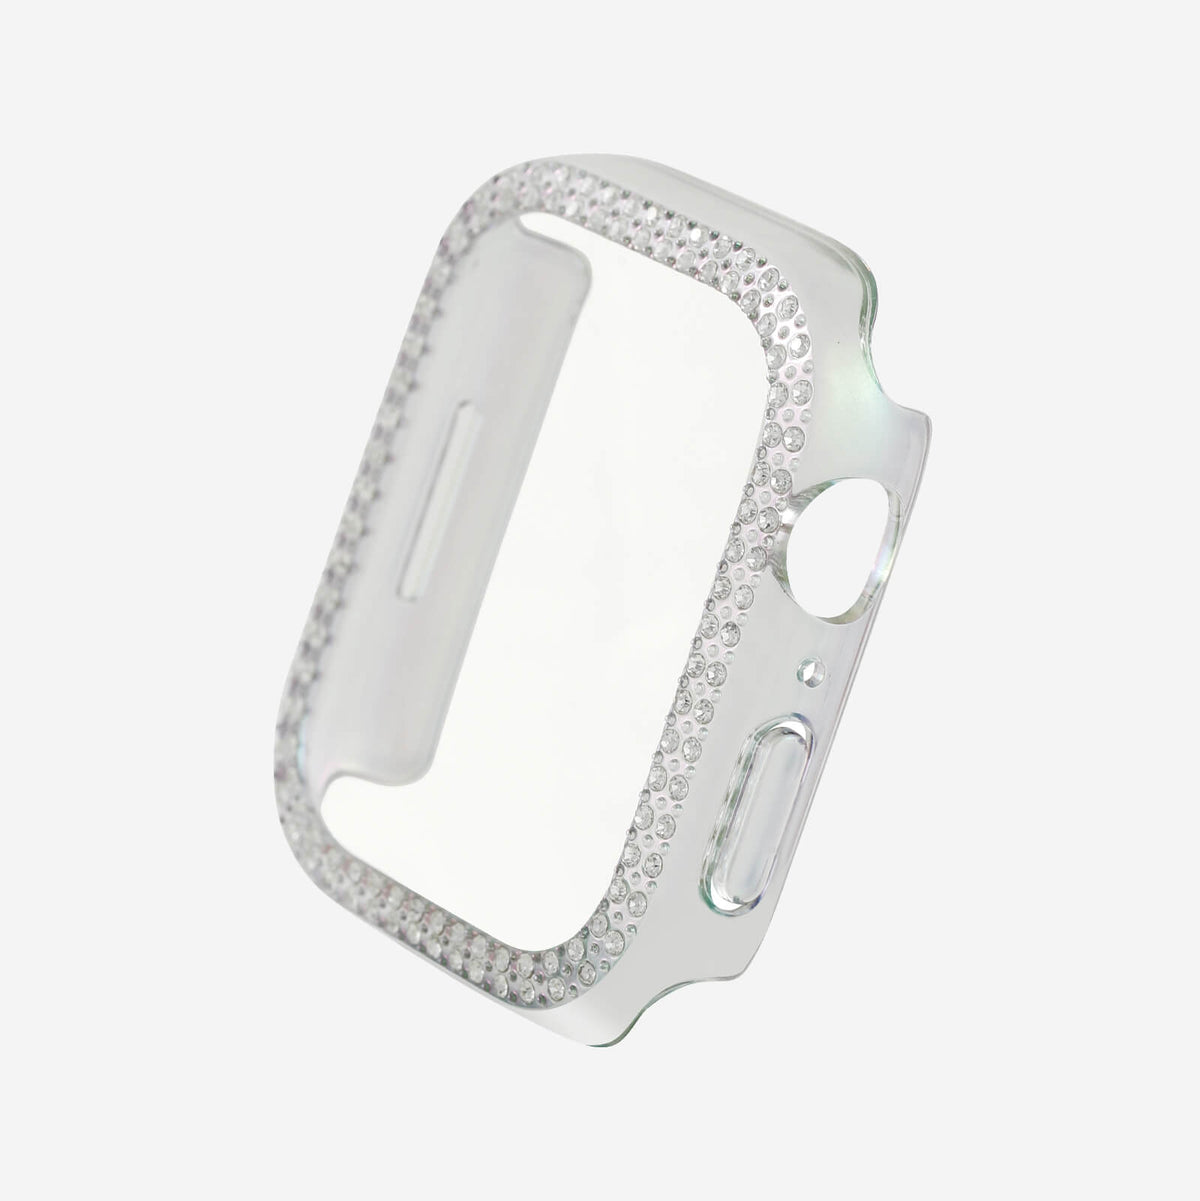 Apple Watch Double Halo Crystal Bumper Case - Pearlescent